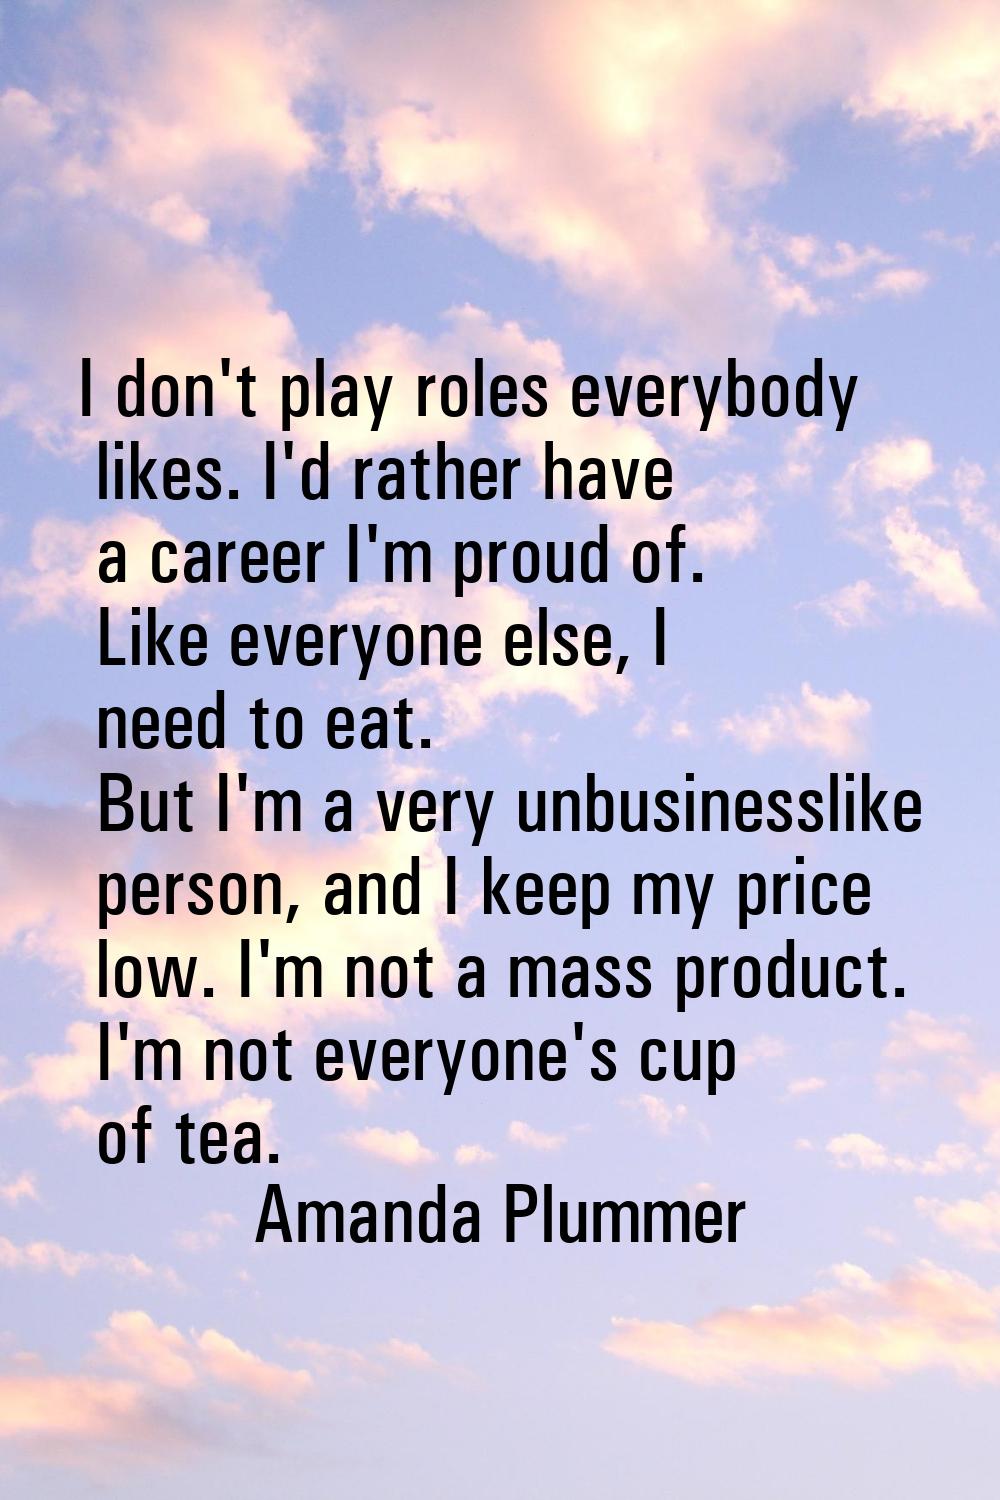 I don't play roles everybody likes. I'd rather have a career I'm proud of. Like everyone else, I ne